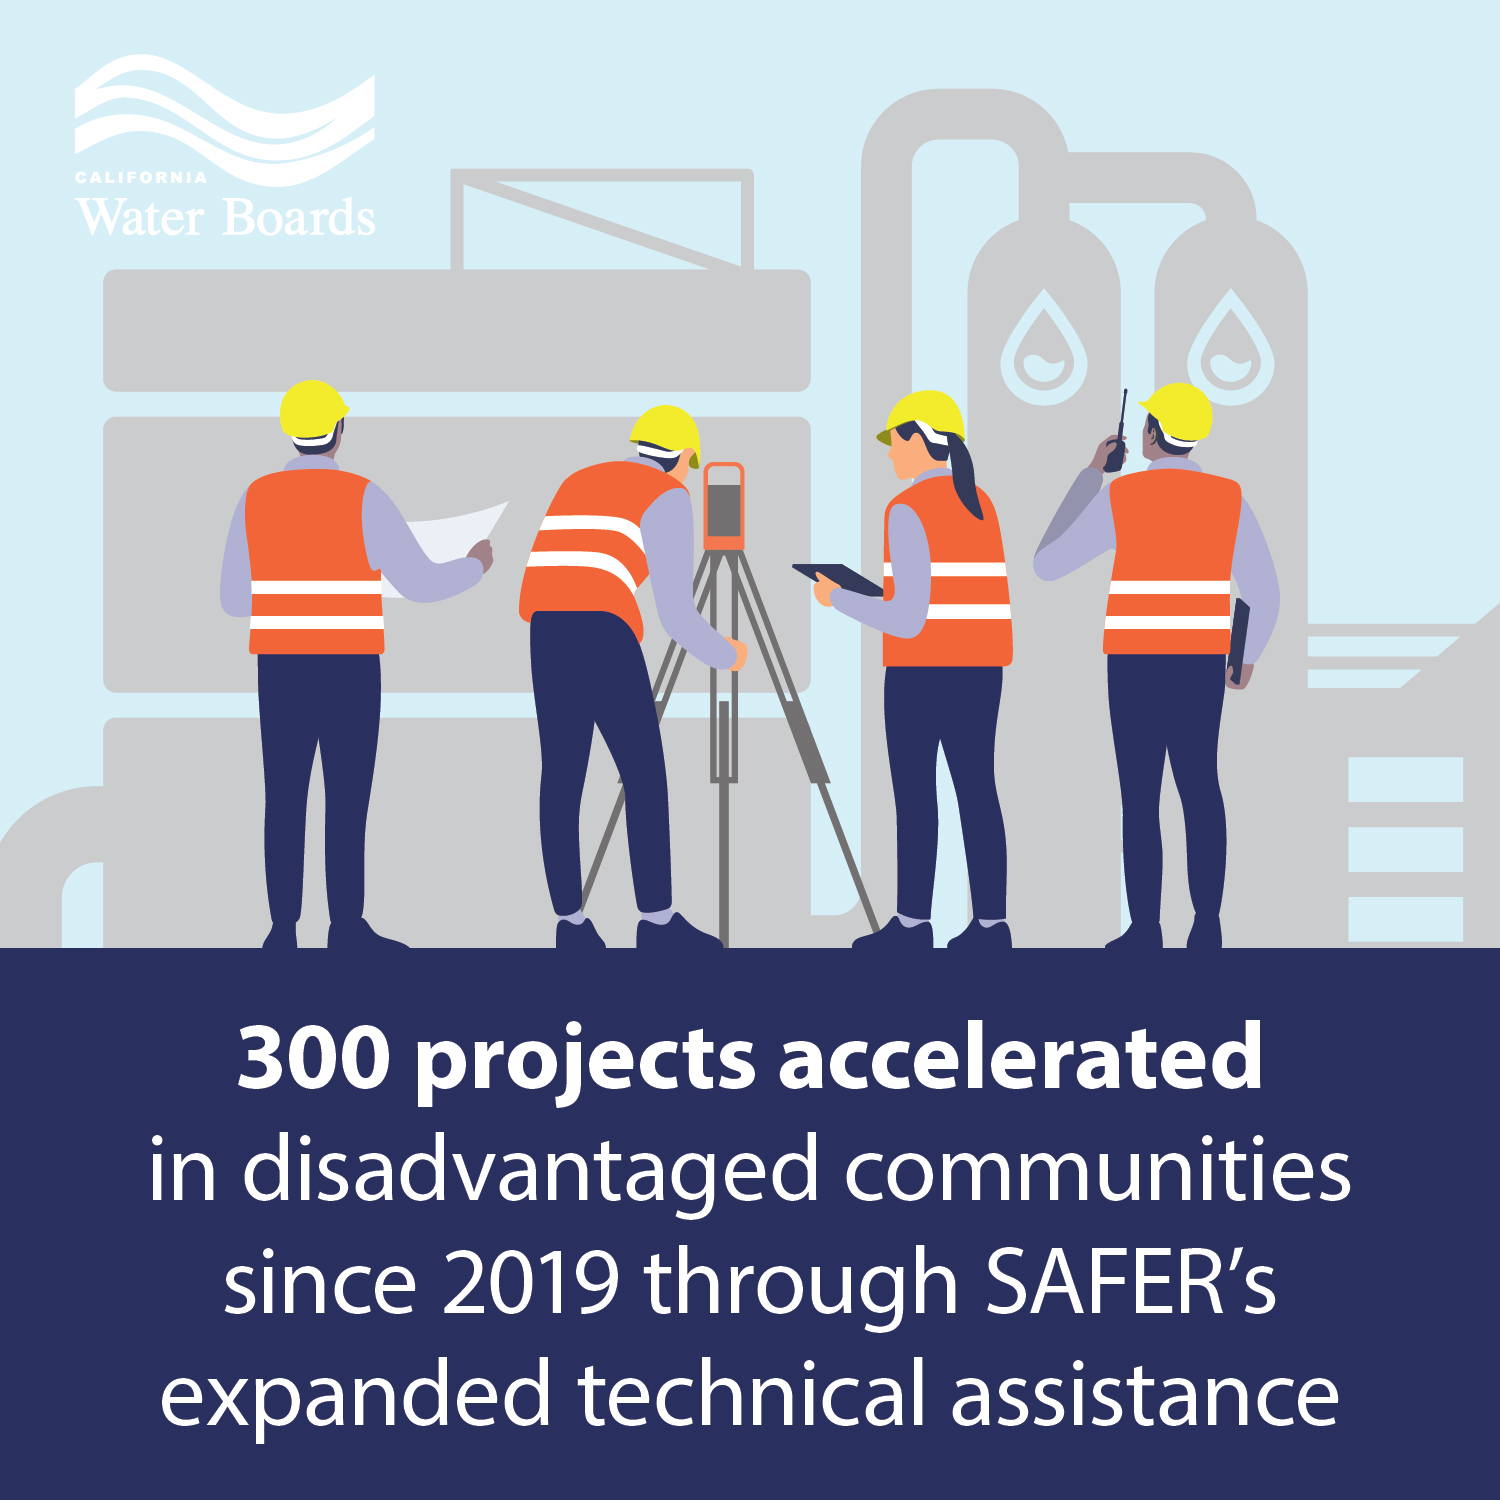 300 projects accelerated in disadvantaged communities since 2019 through SAFER's expanded technical assistance